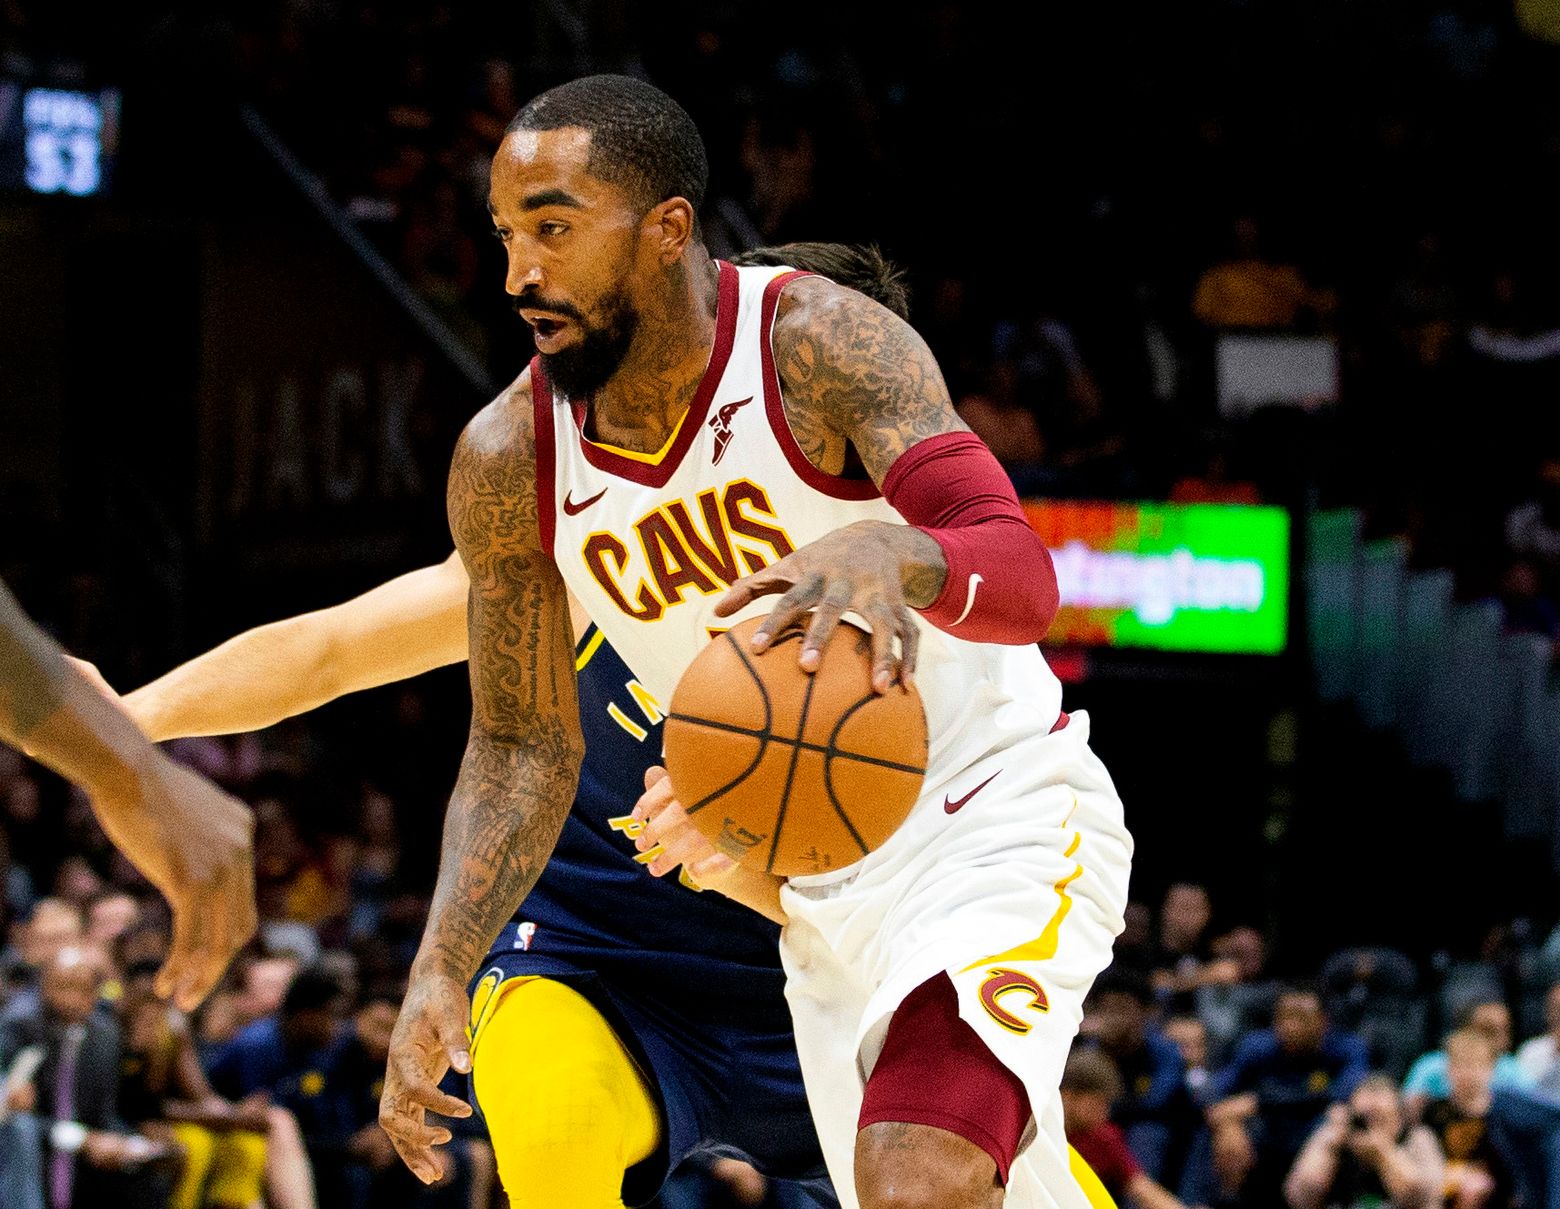 New Lakers guard J.R. Smith dug out of 'depressed state' on pathway back to  the NBA – Orange County Register